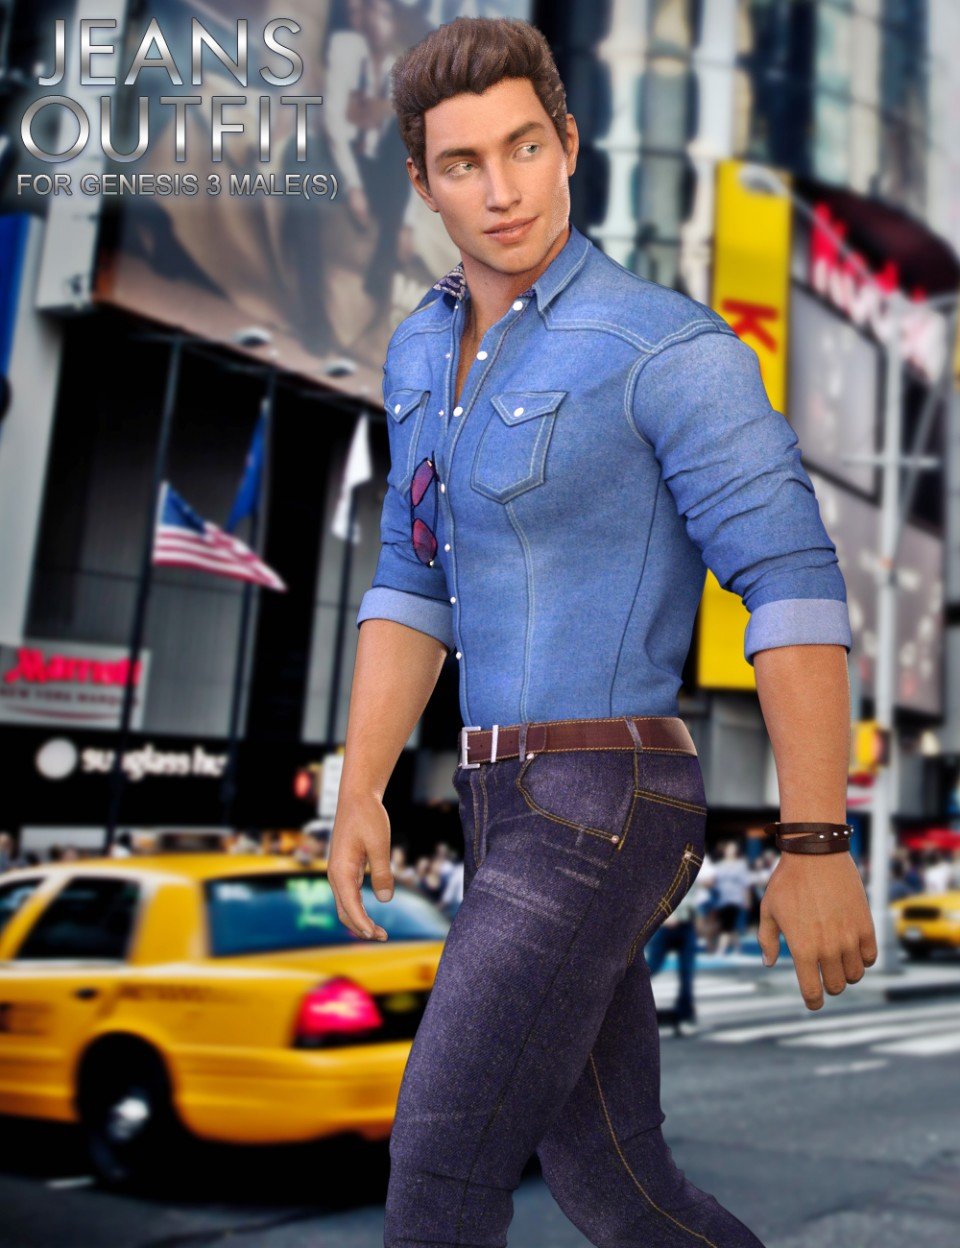 Jeans Outfit for Genesis 3 Male(s)_DAZ3D下载站